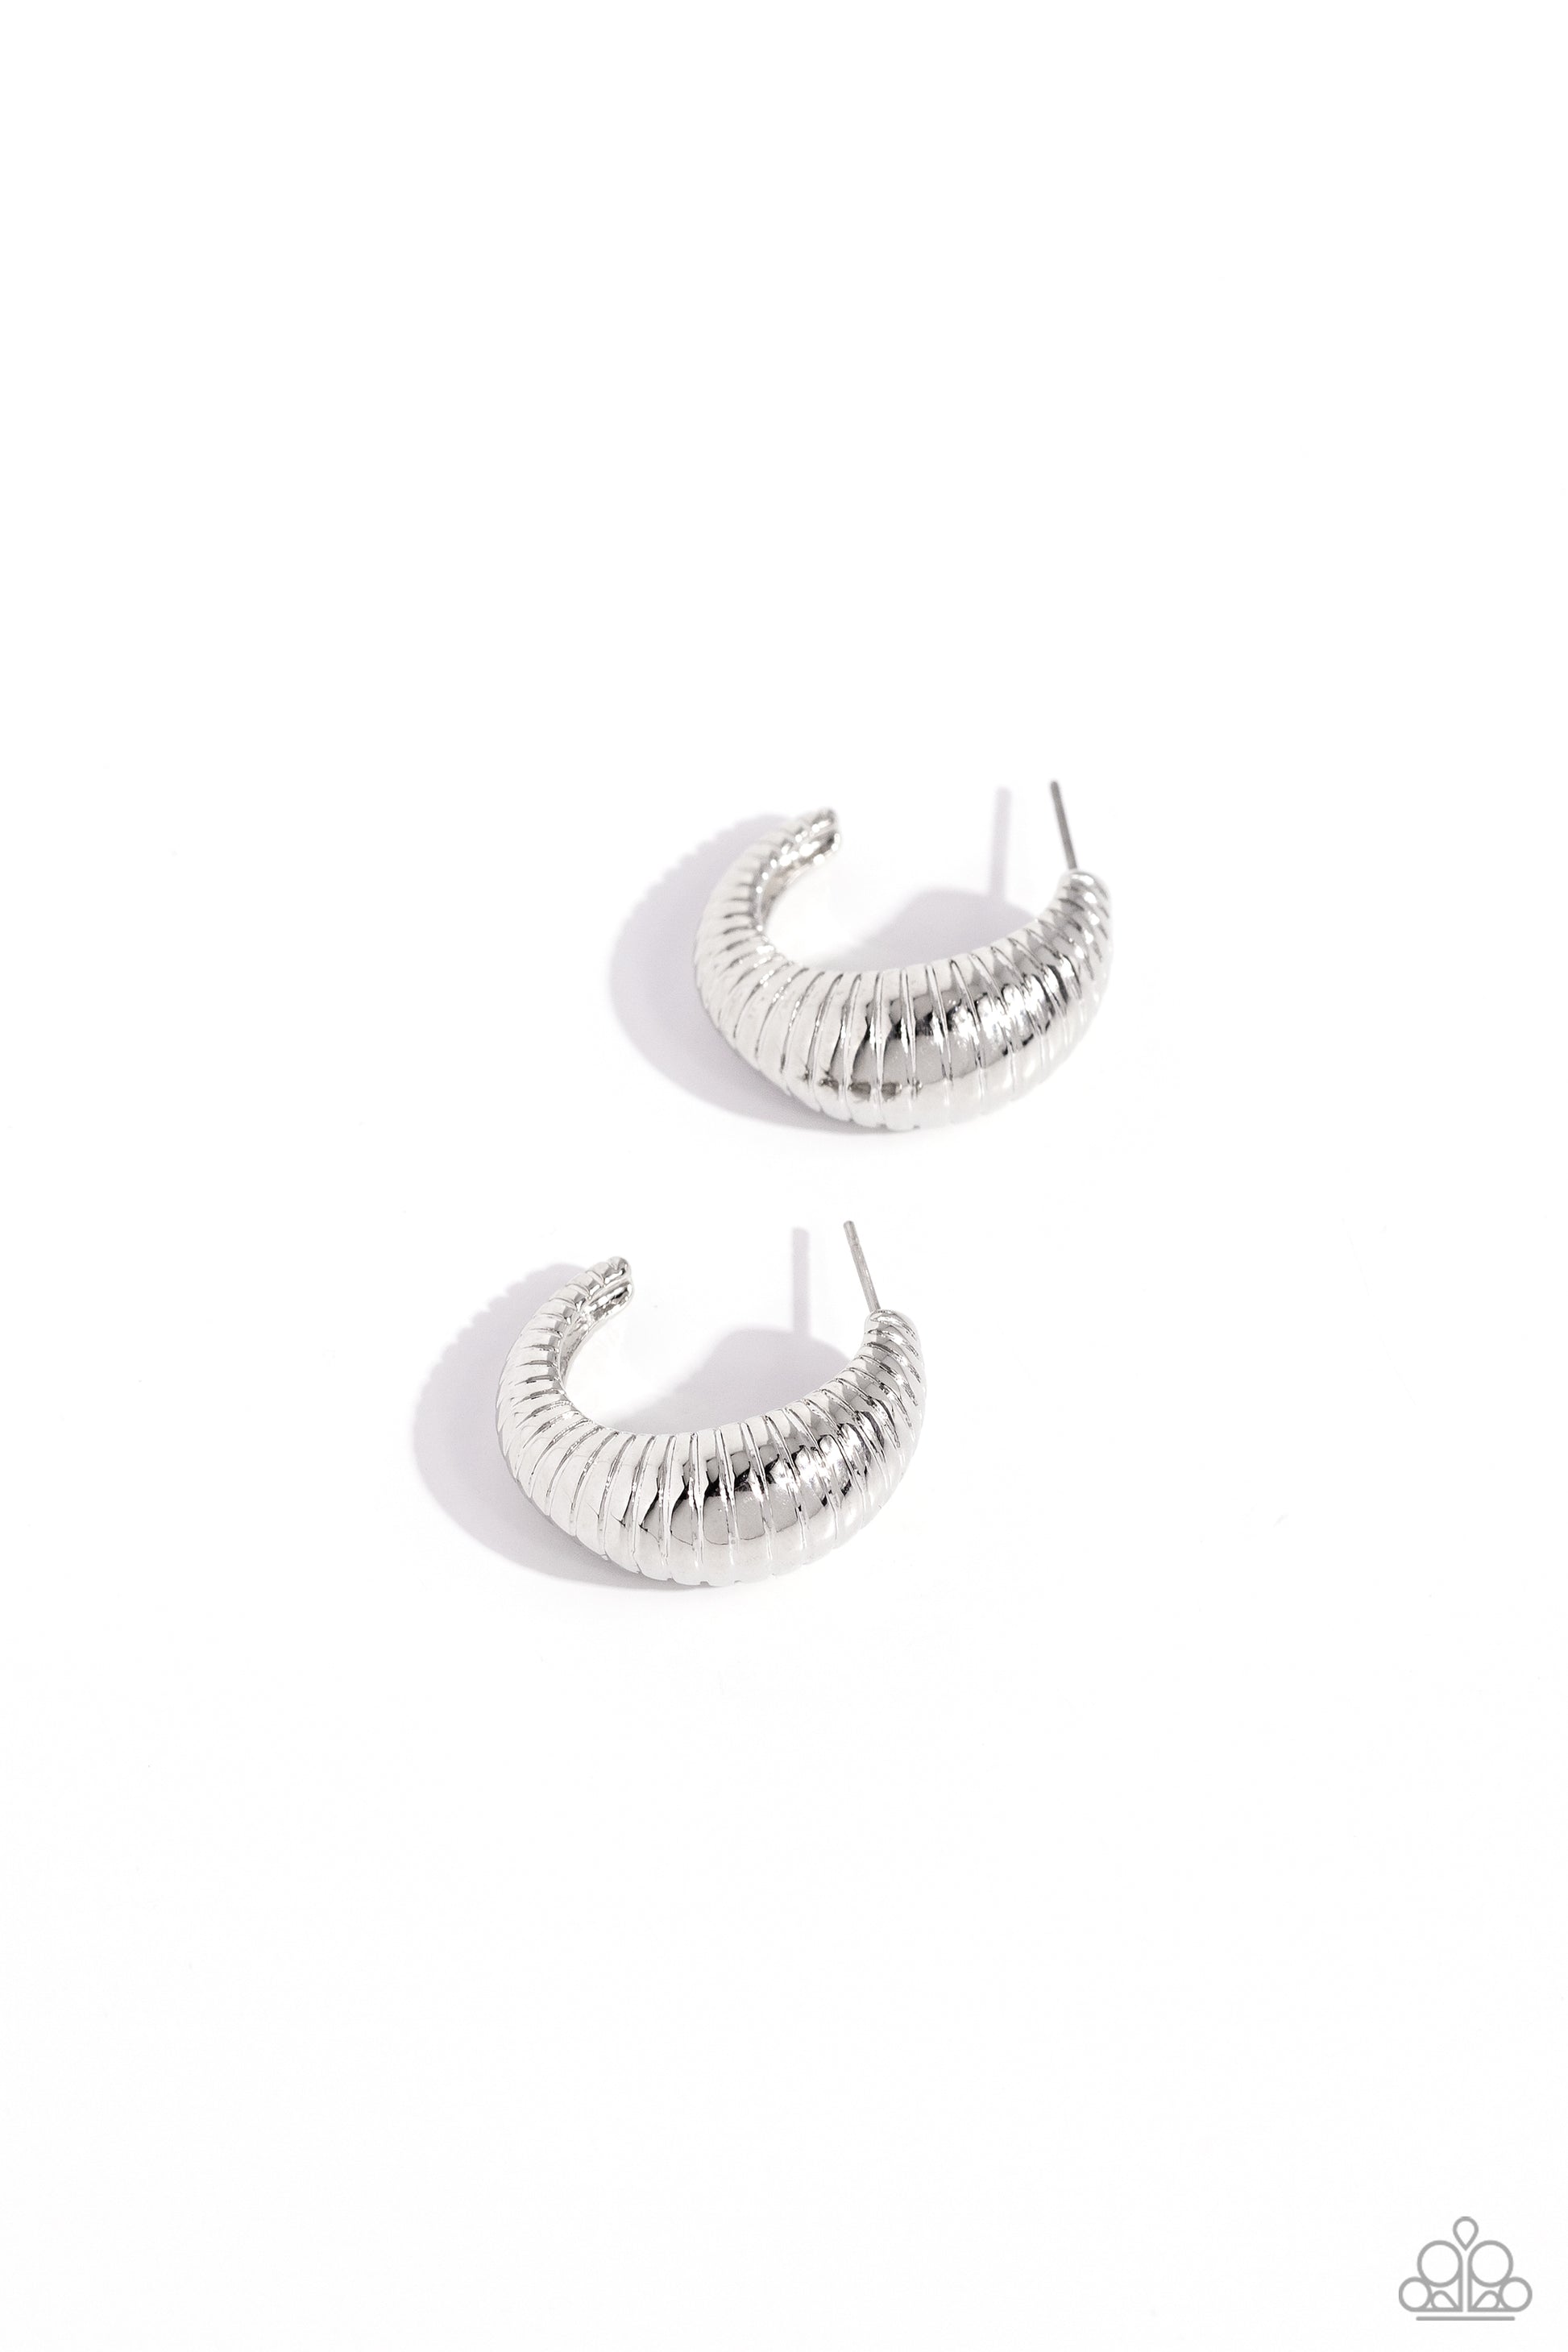 Textured Tenure Silver Hoop Earring - Paparazzi Accessories  Featuring a beveled surface, a thick textured silver frame curves into a single hoop, creating an attention-grabbing shimmer. Earring attaches to a standard post fitting. Hoop measures approximately 3/4" in diameter.  Sold as one pair of hoop earrings.  P5HO-SVXX-375XX